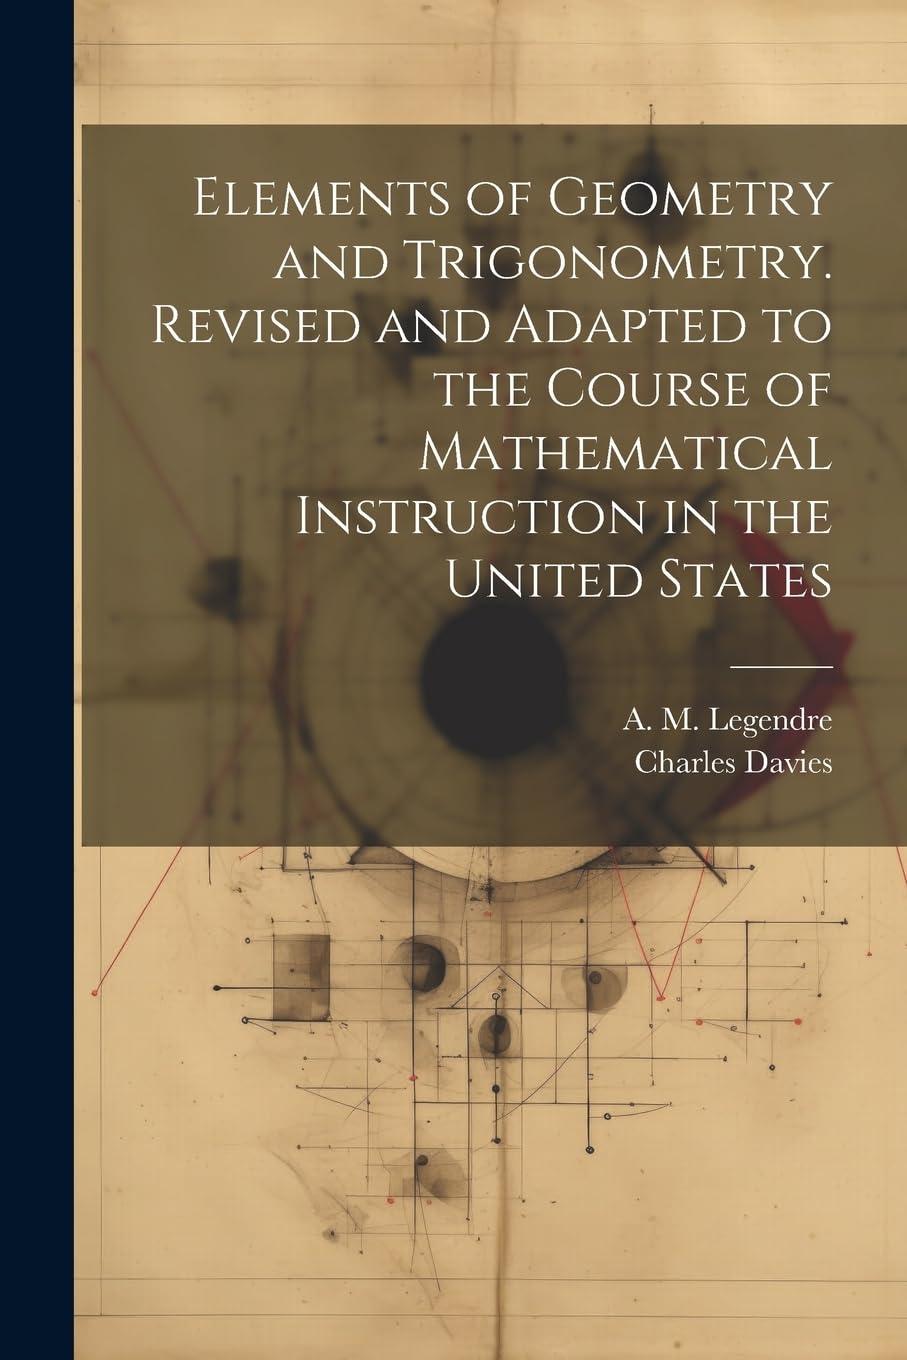 elements of geometry and trigonometry revised and adapted to the course of mathematical instruction in the